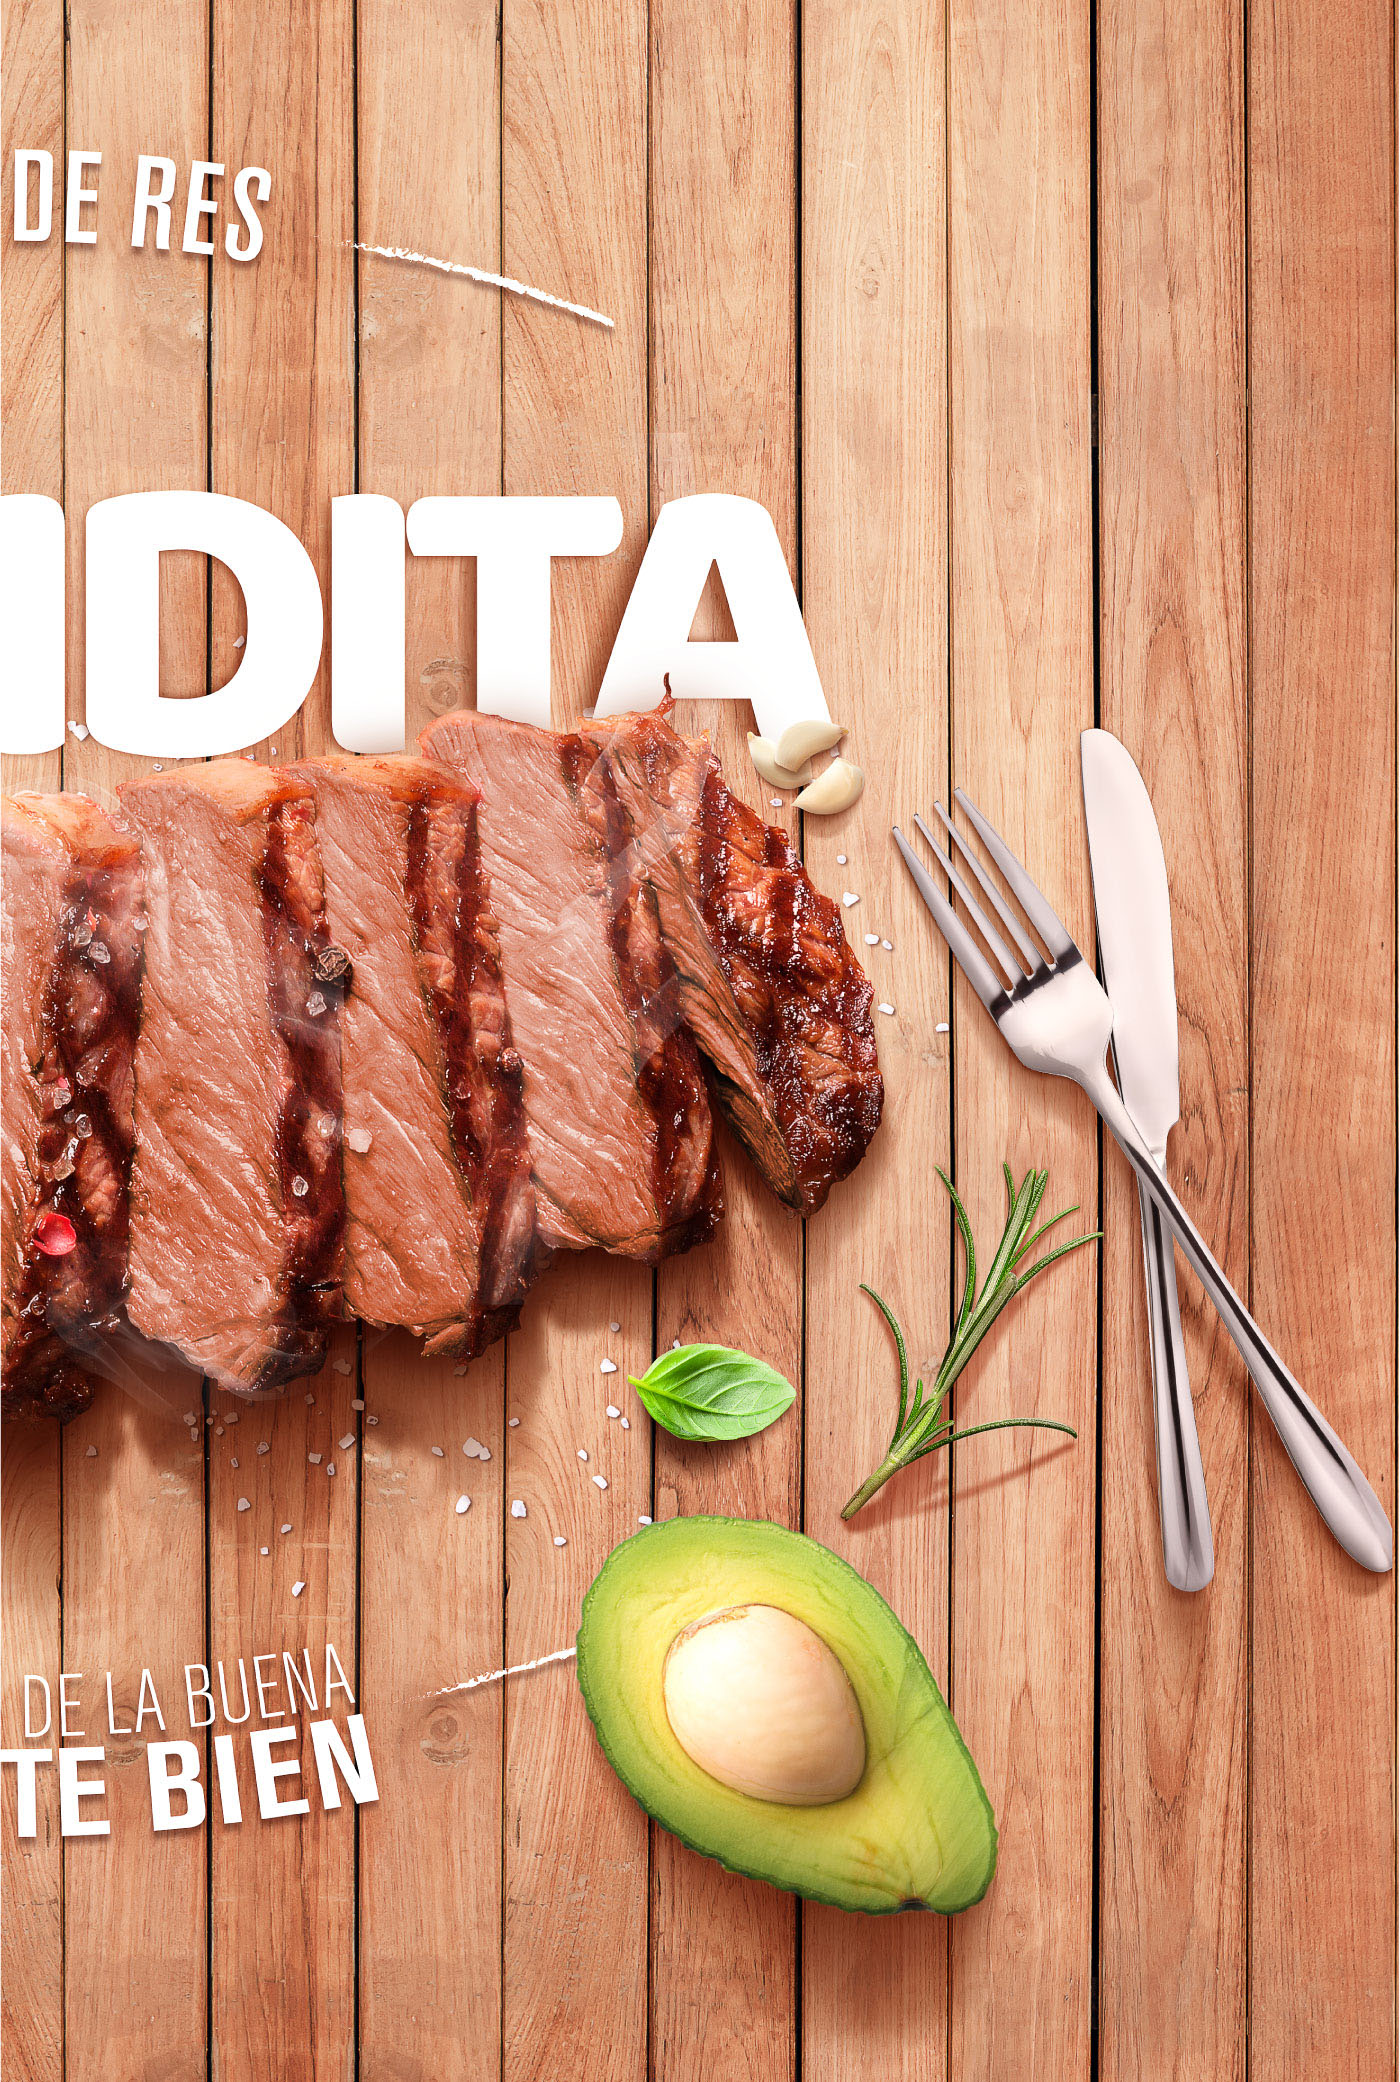 Campaña meat Food  publicity Advertising  photoshop BBQ menu desing retouch